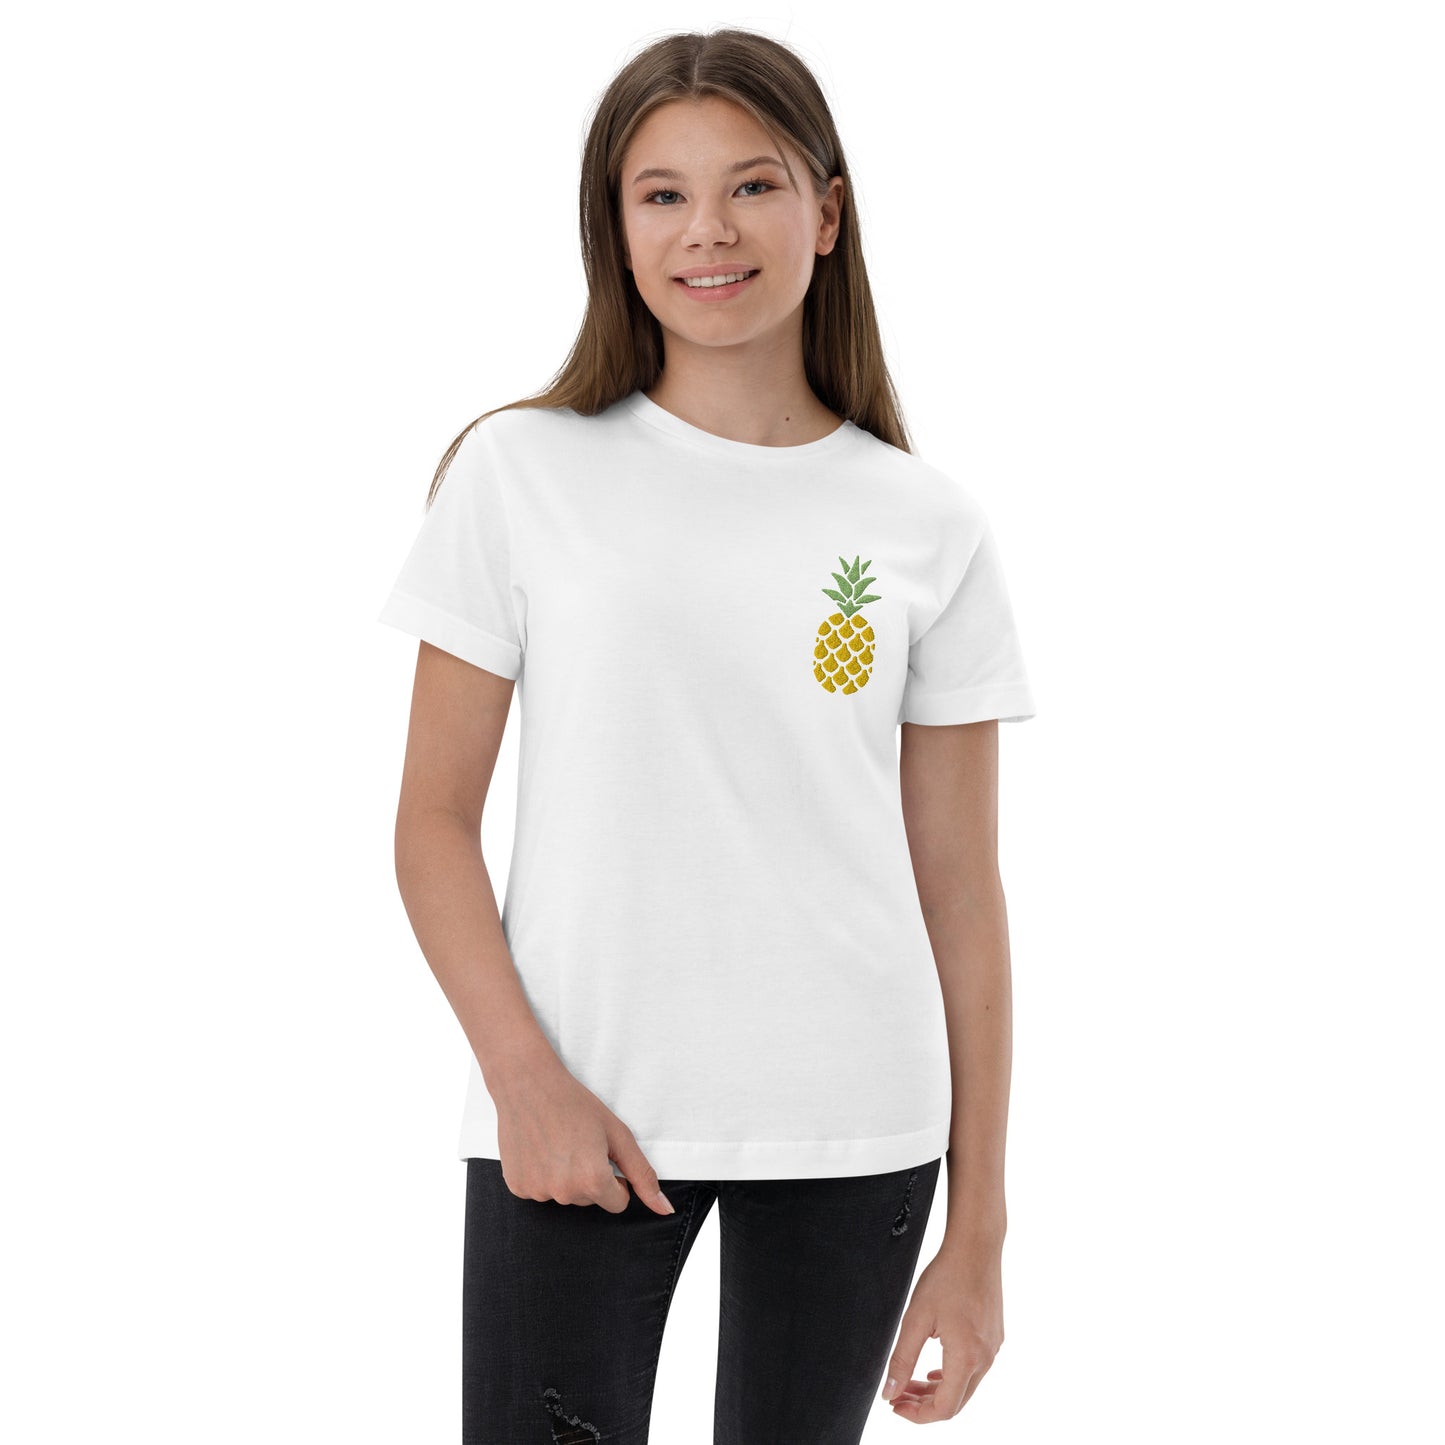 Embroidered Pineapple Kid's Jersey T-Shirt